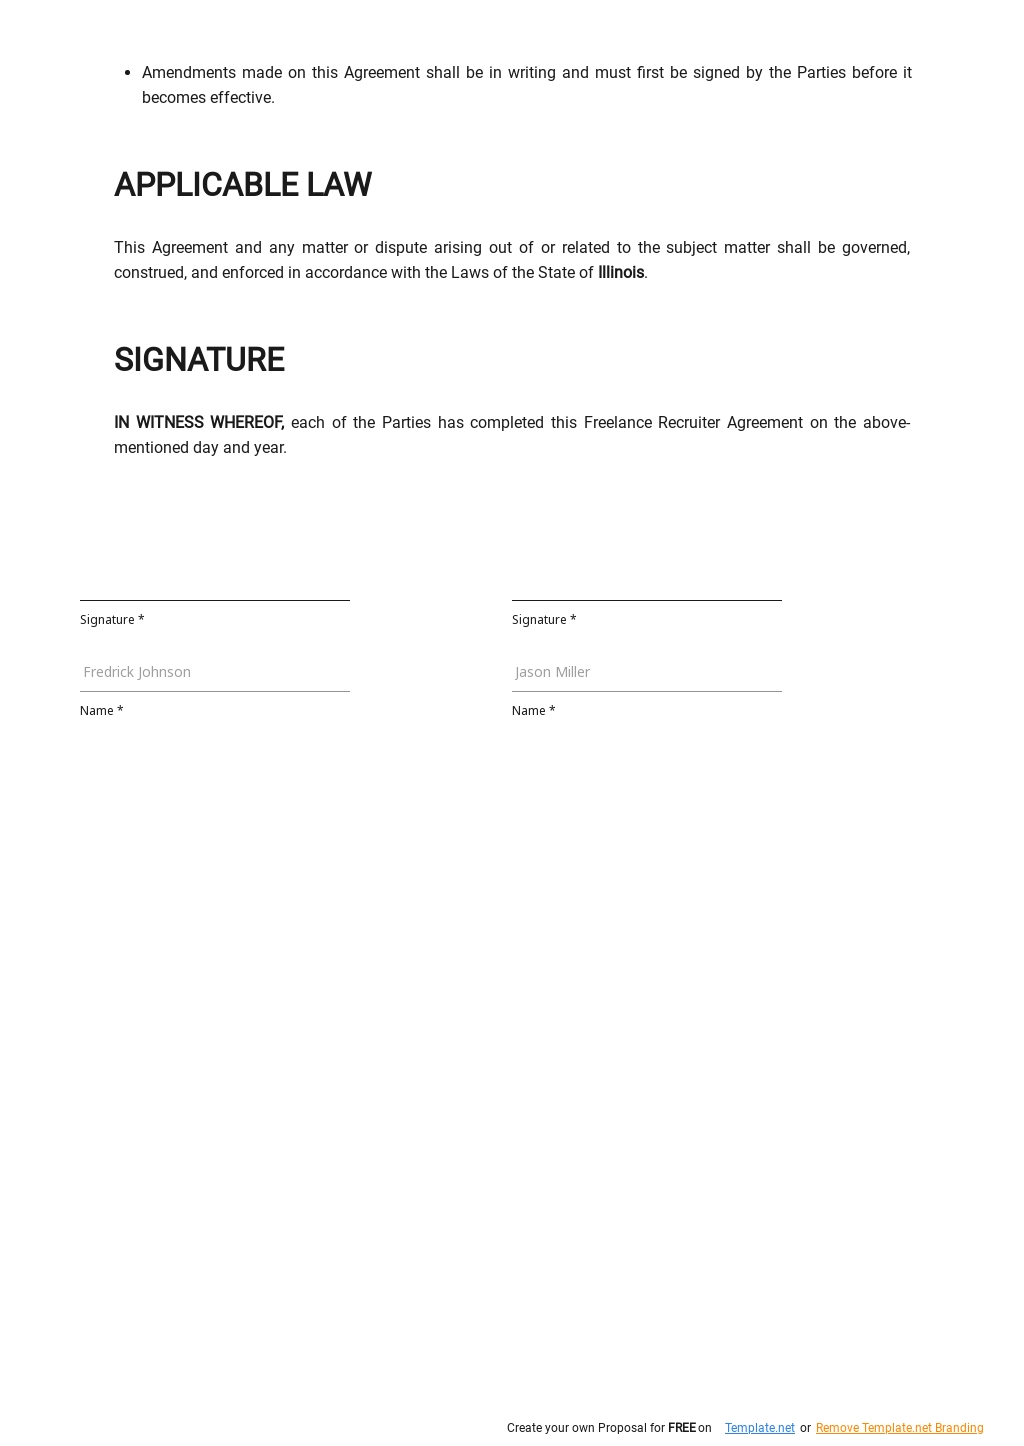 Freelance Recruiter Agreement Template in